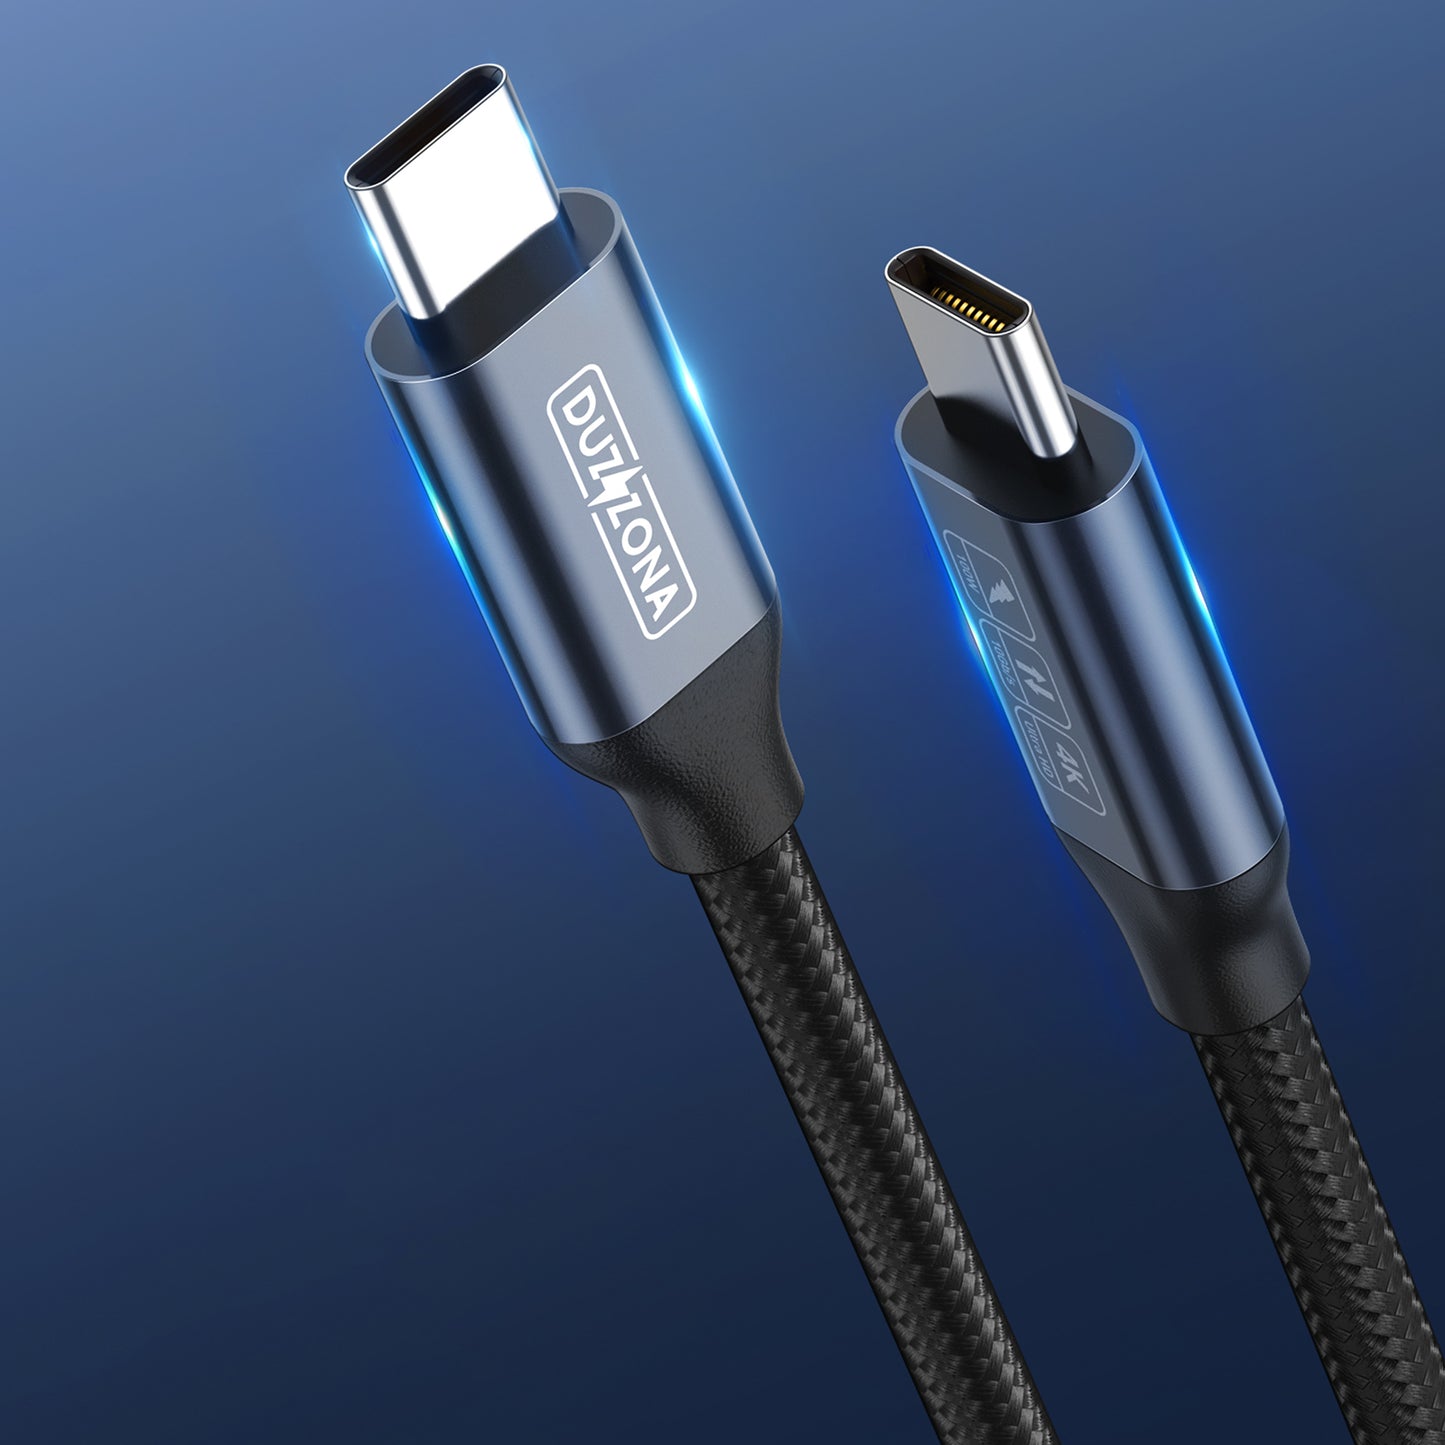 100W 10Gbps 4K USB-C to USB-C Cable